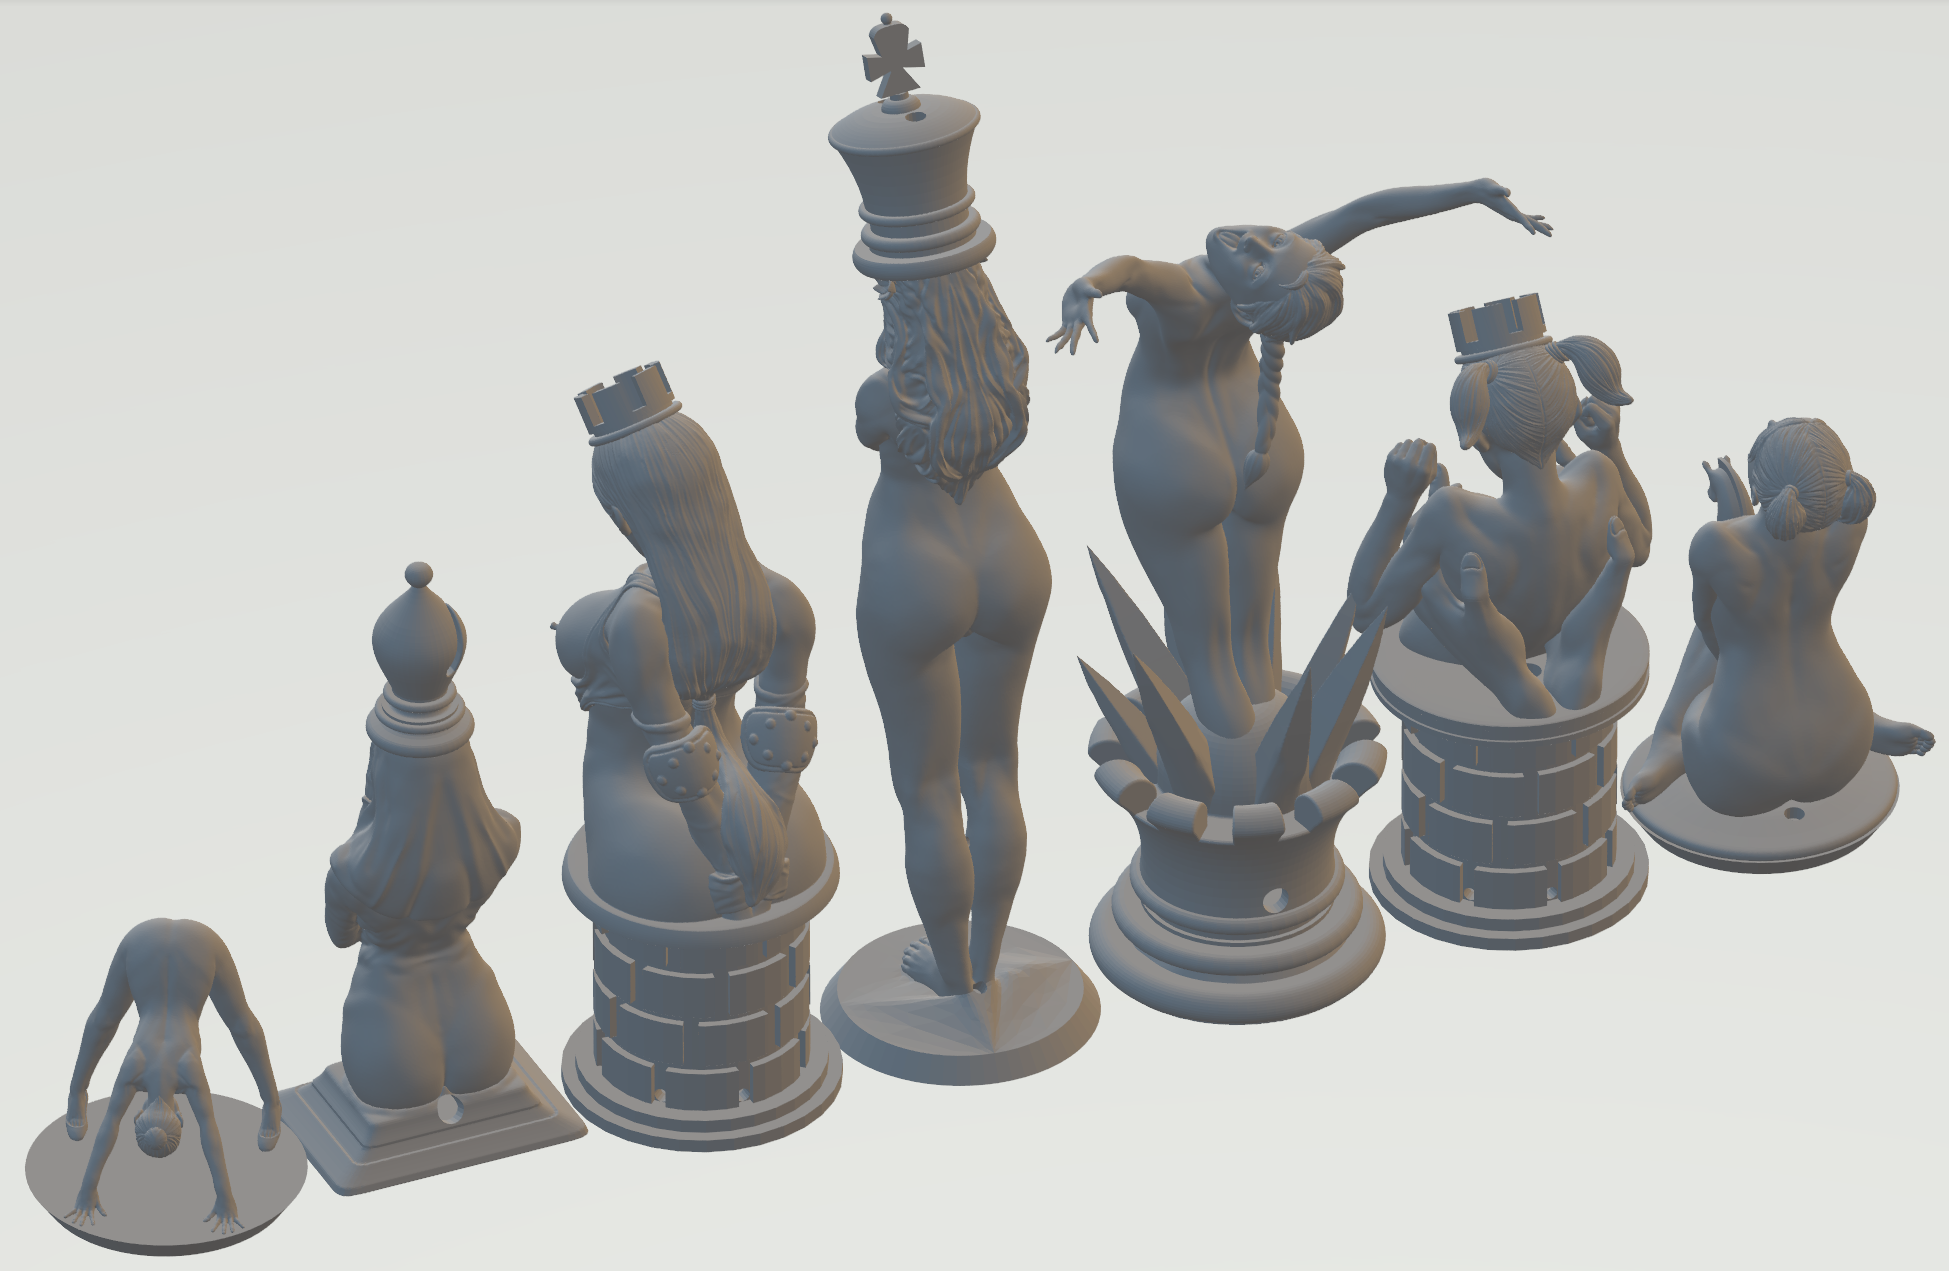 4 Player Chess Board Nude Chess Set By Am Prints Download Free Stl Model